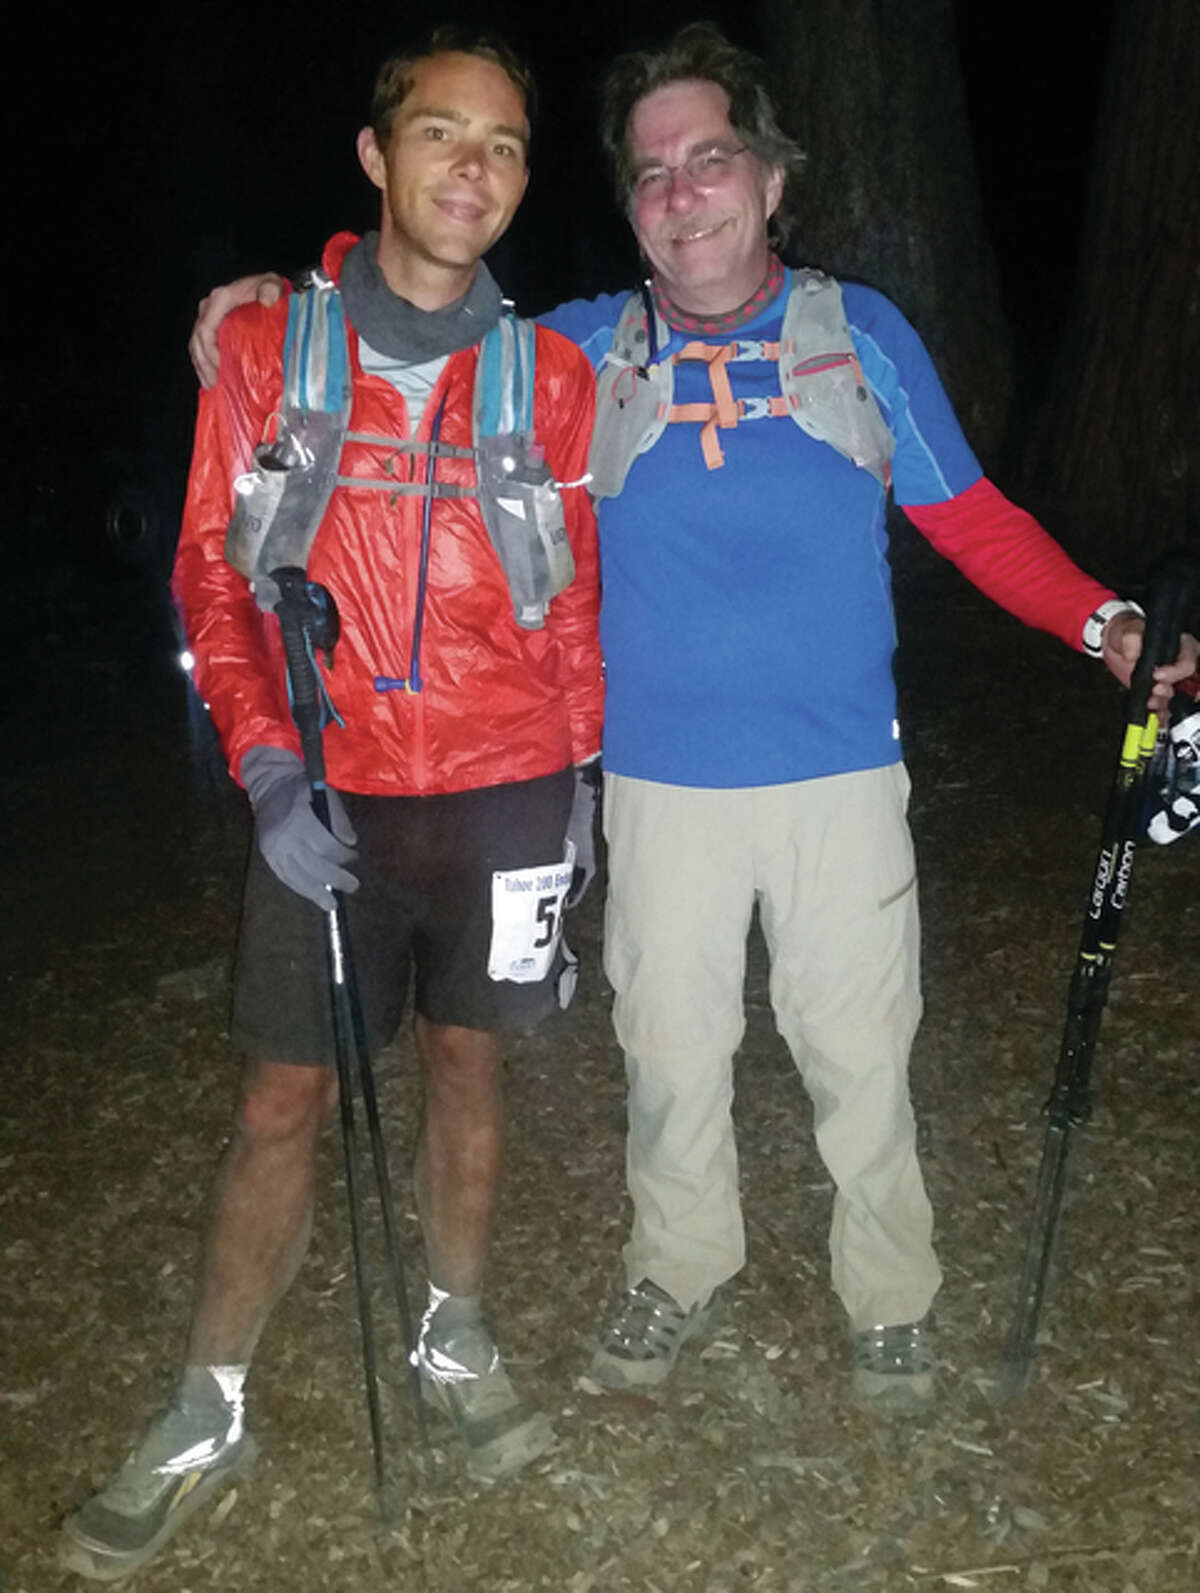 Justin Galbraith, an Alton High School graduate, poses for a photo with his father, Bill Galbraith, right after Justin finished the Tahoe-200, a 205-mile running race around Lake Tahoe. He completed the race is 85 hours with very little sleep.